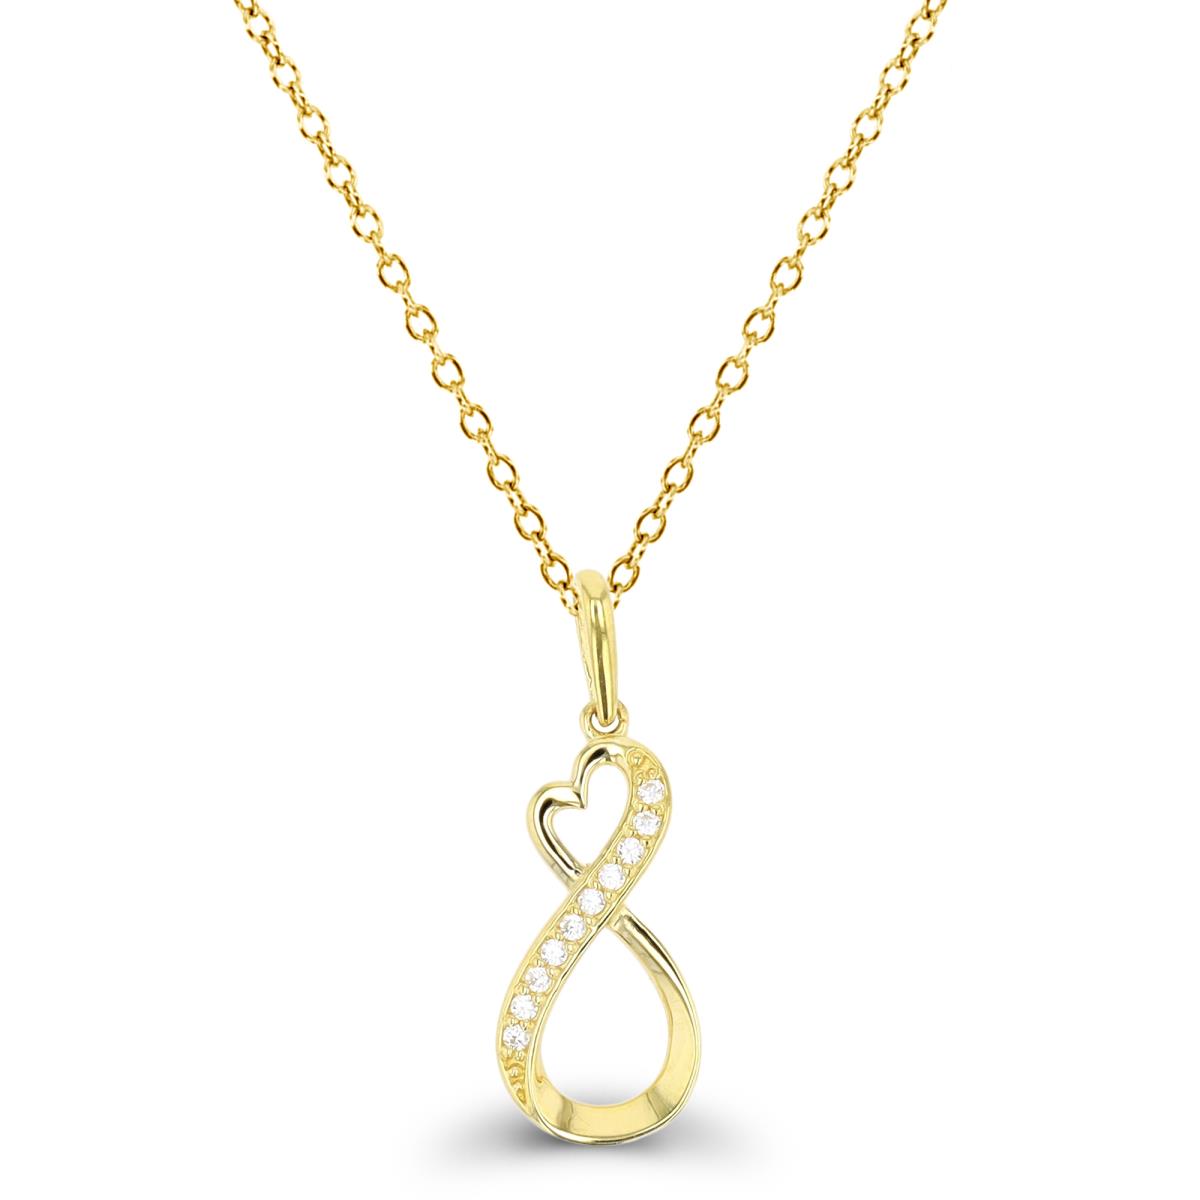 10K Yellow Gold Infinity Heart 18" Necklace